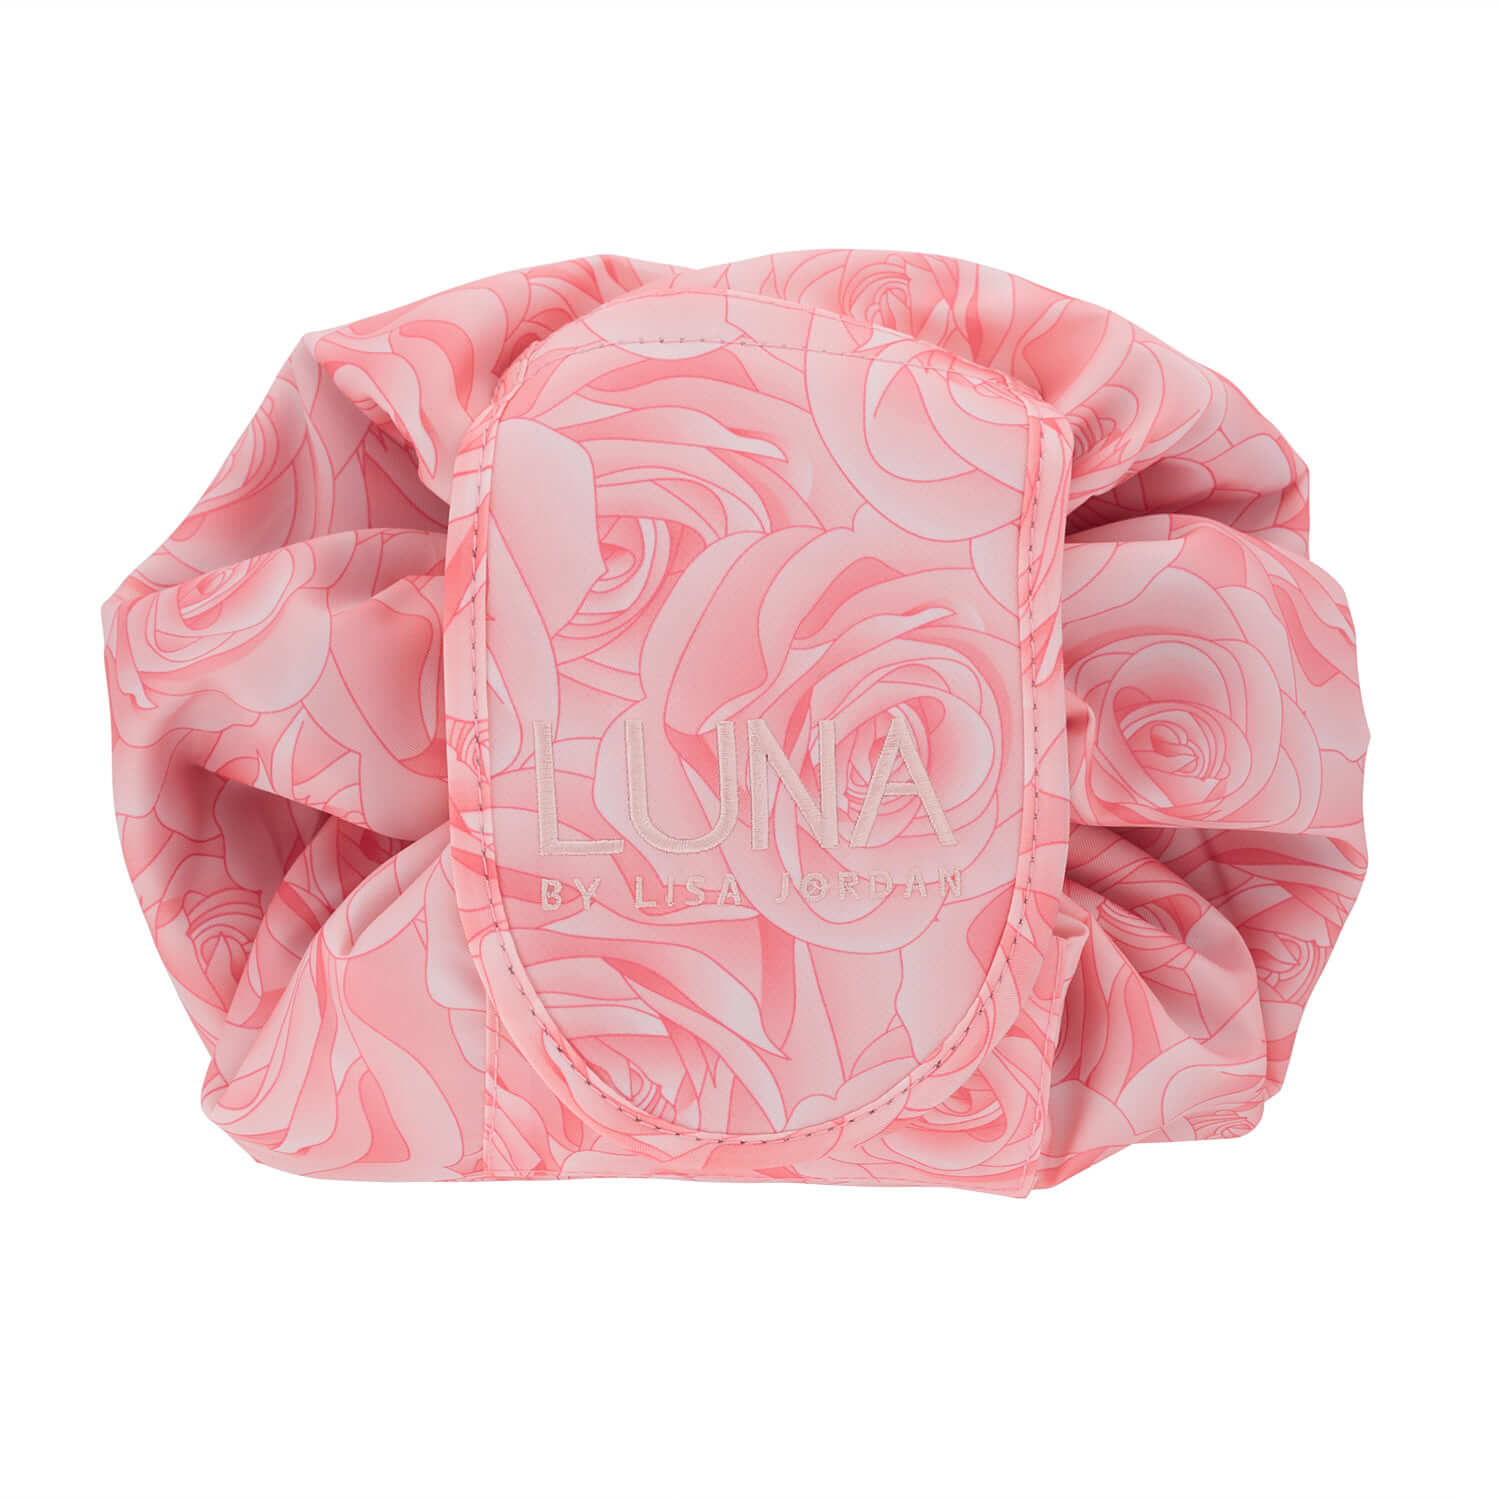 Luna By Lisa Beauty Bag - Roses 1 Shaws Department Stores